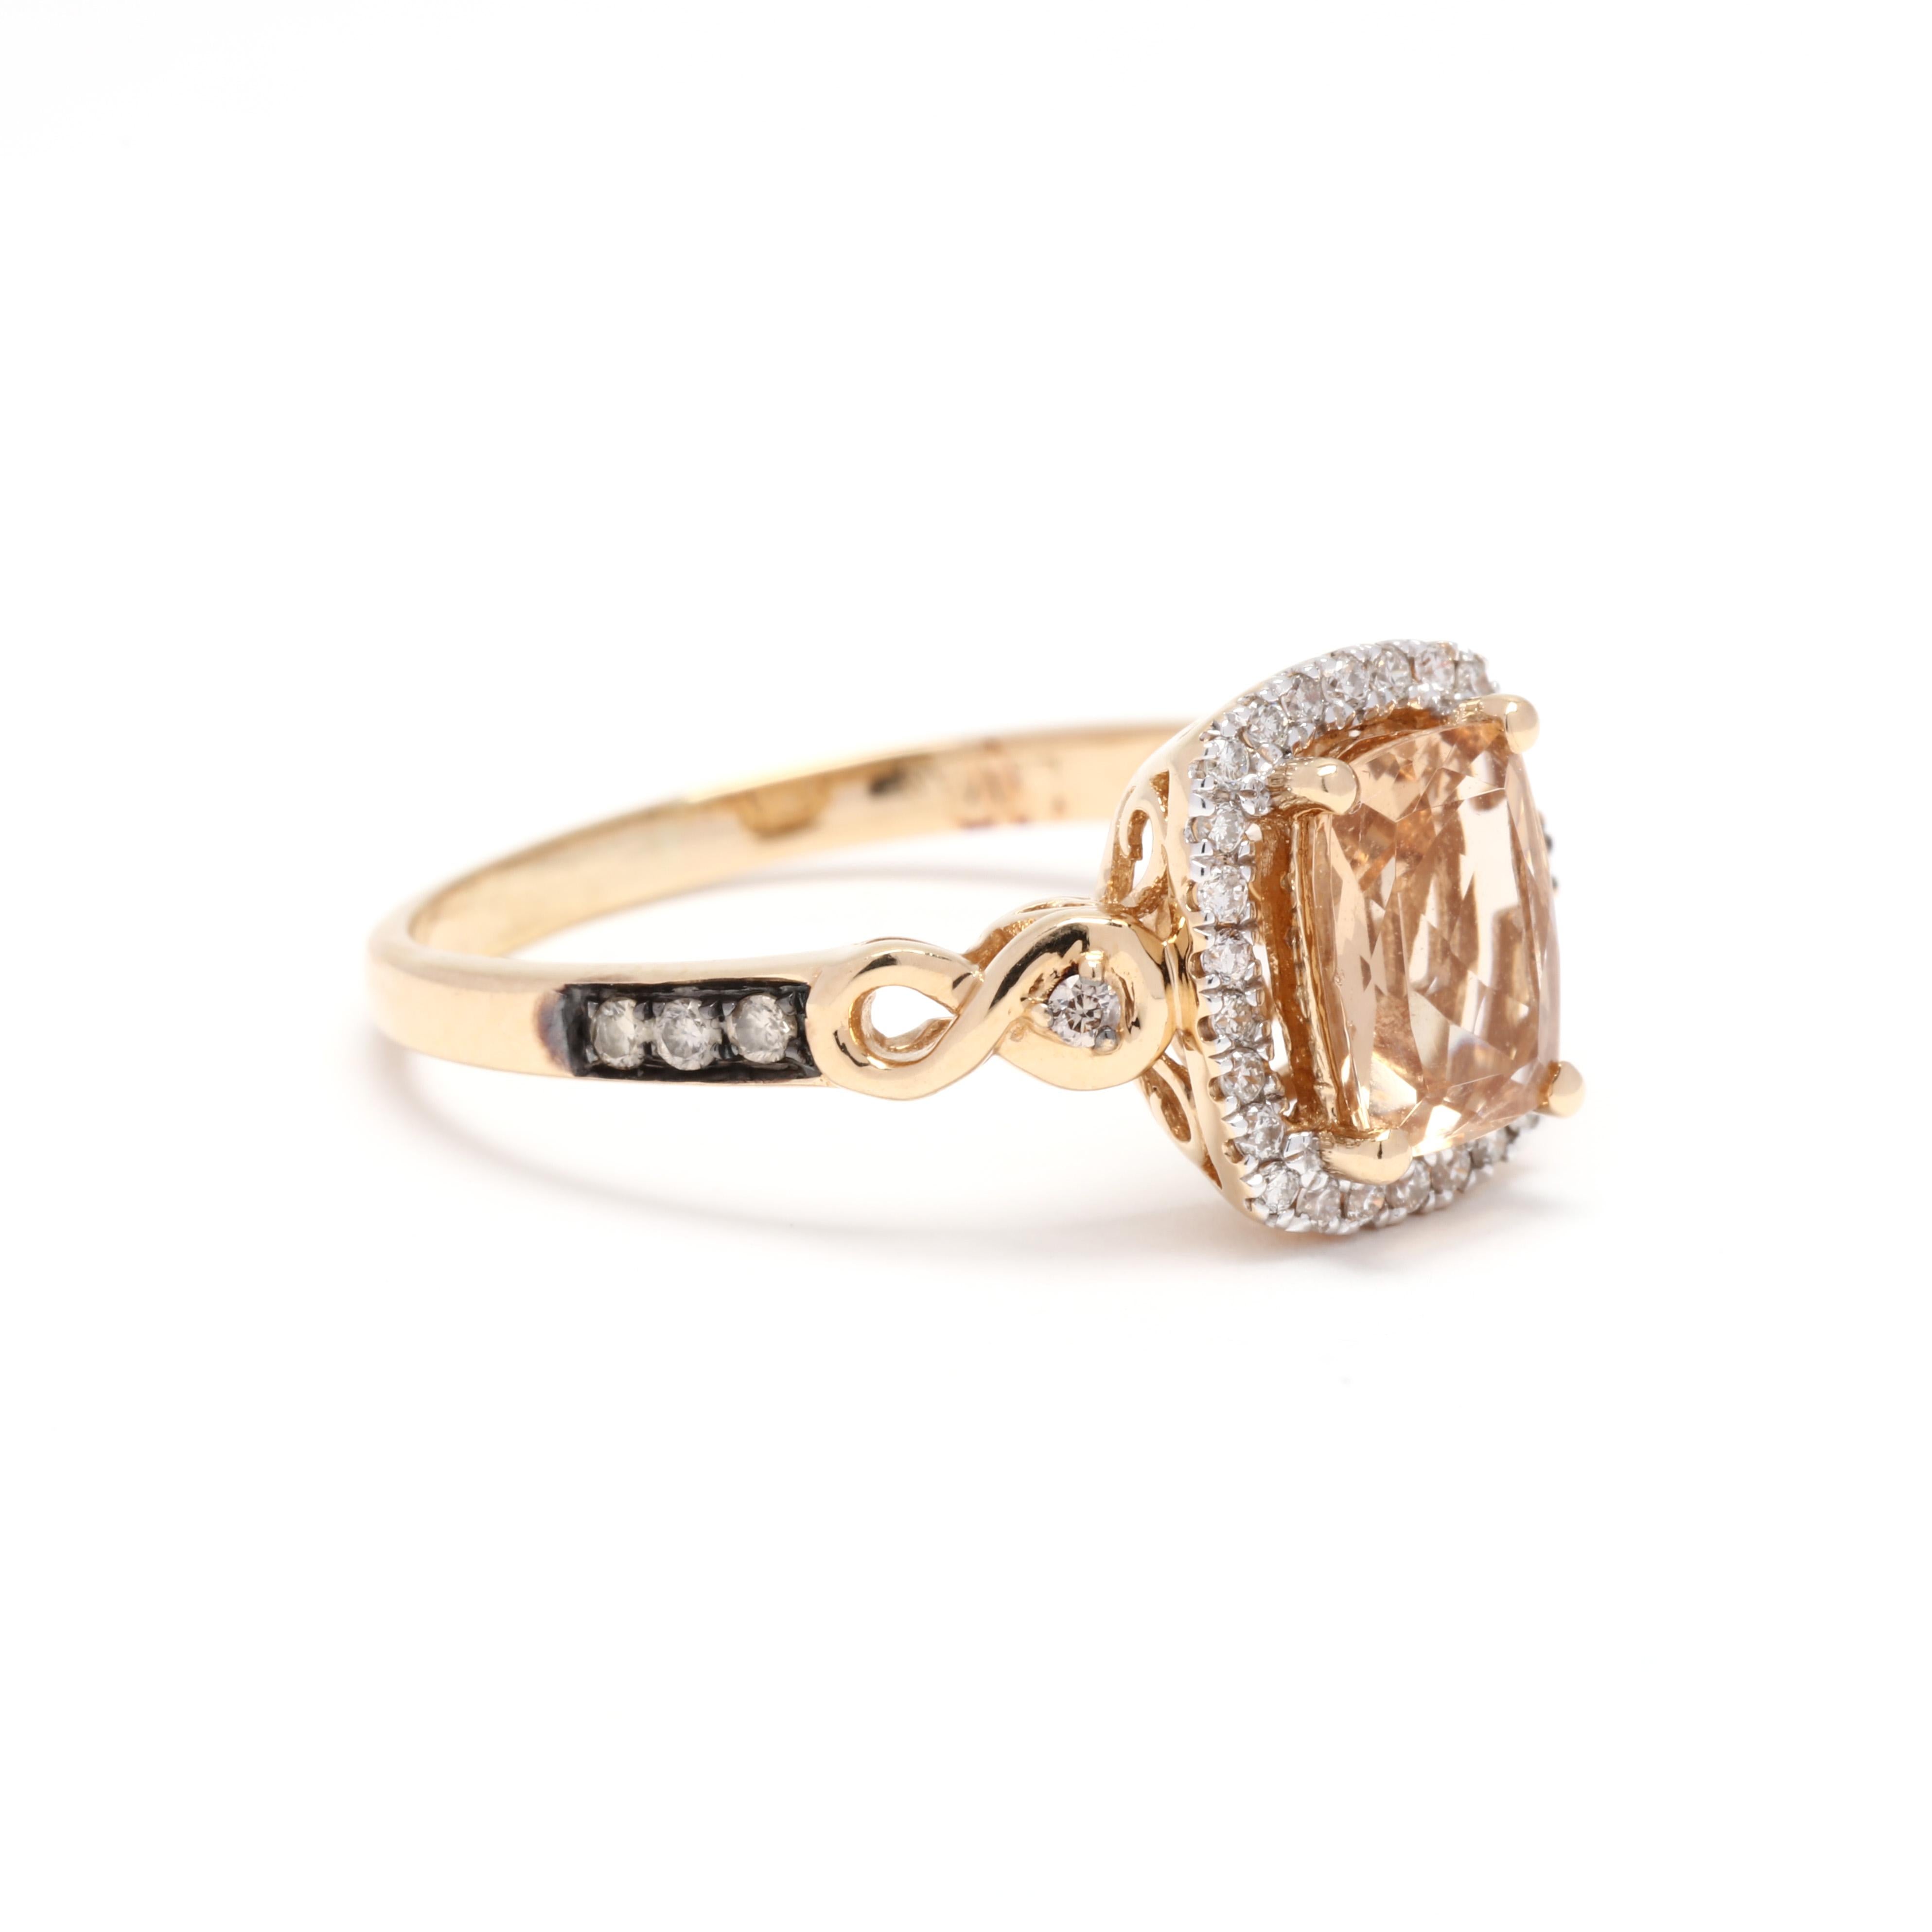 A LeVian 14 karat yellow gold heliodor beryl and diamond ring. This ring features a prong set, cushion cut heliodor beryl weighing approximately 1.50 carats surrounded by a halo of full cut round diamonds weighing approximately .15 total carats and